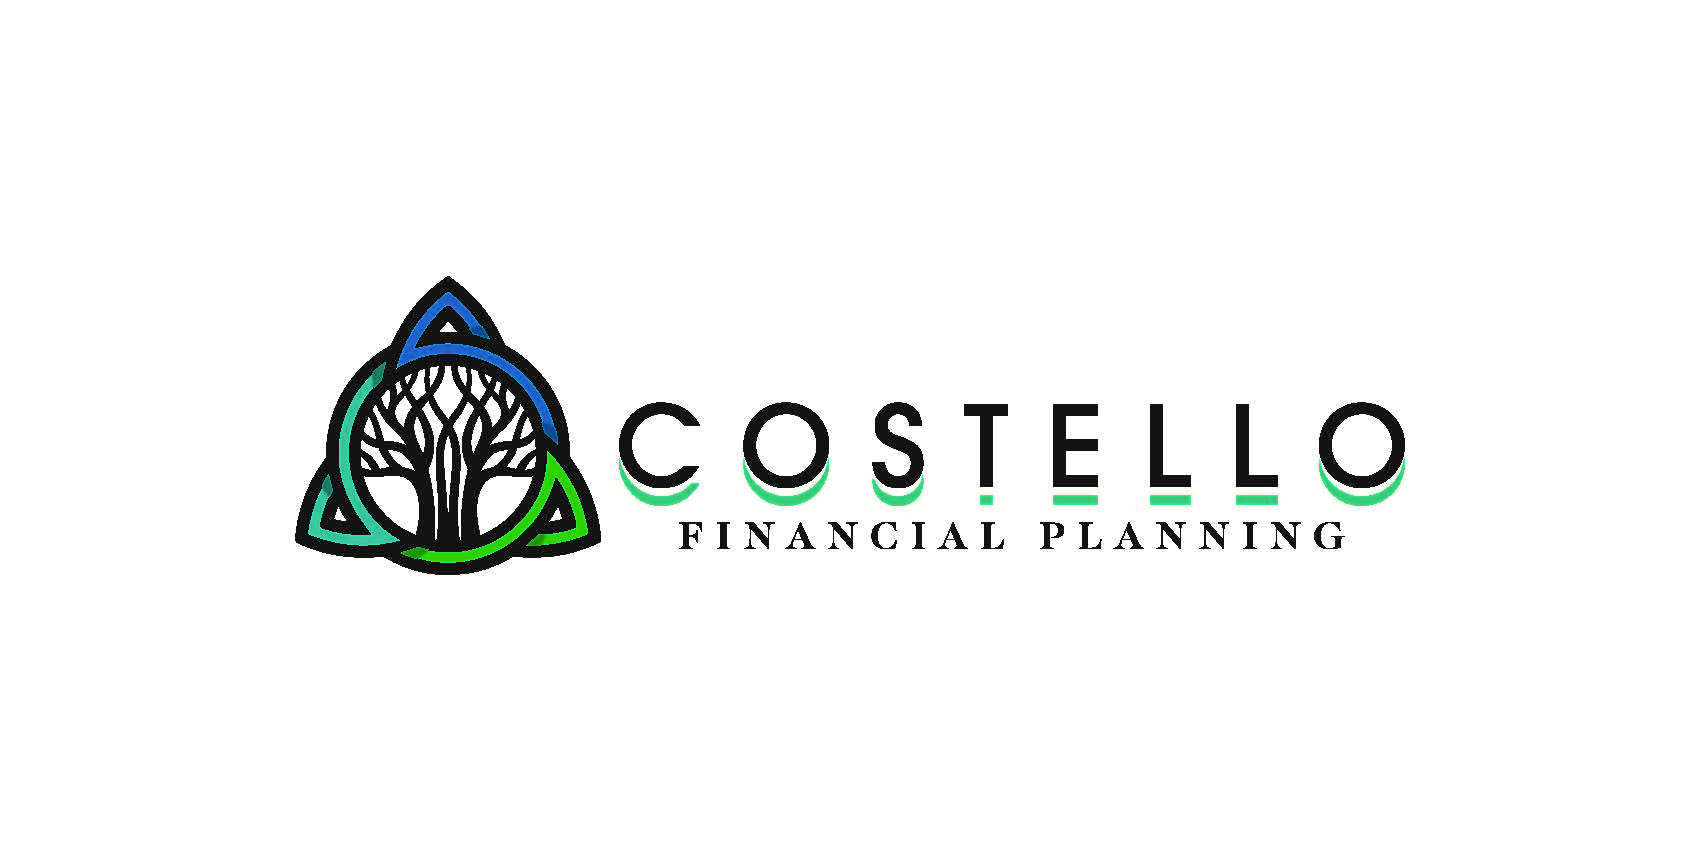 Costello Financial Planning